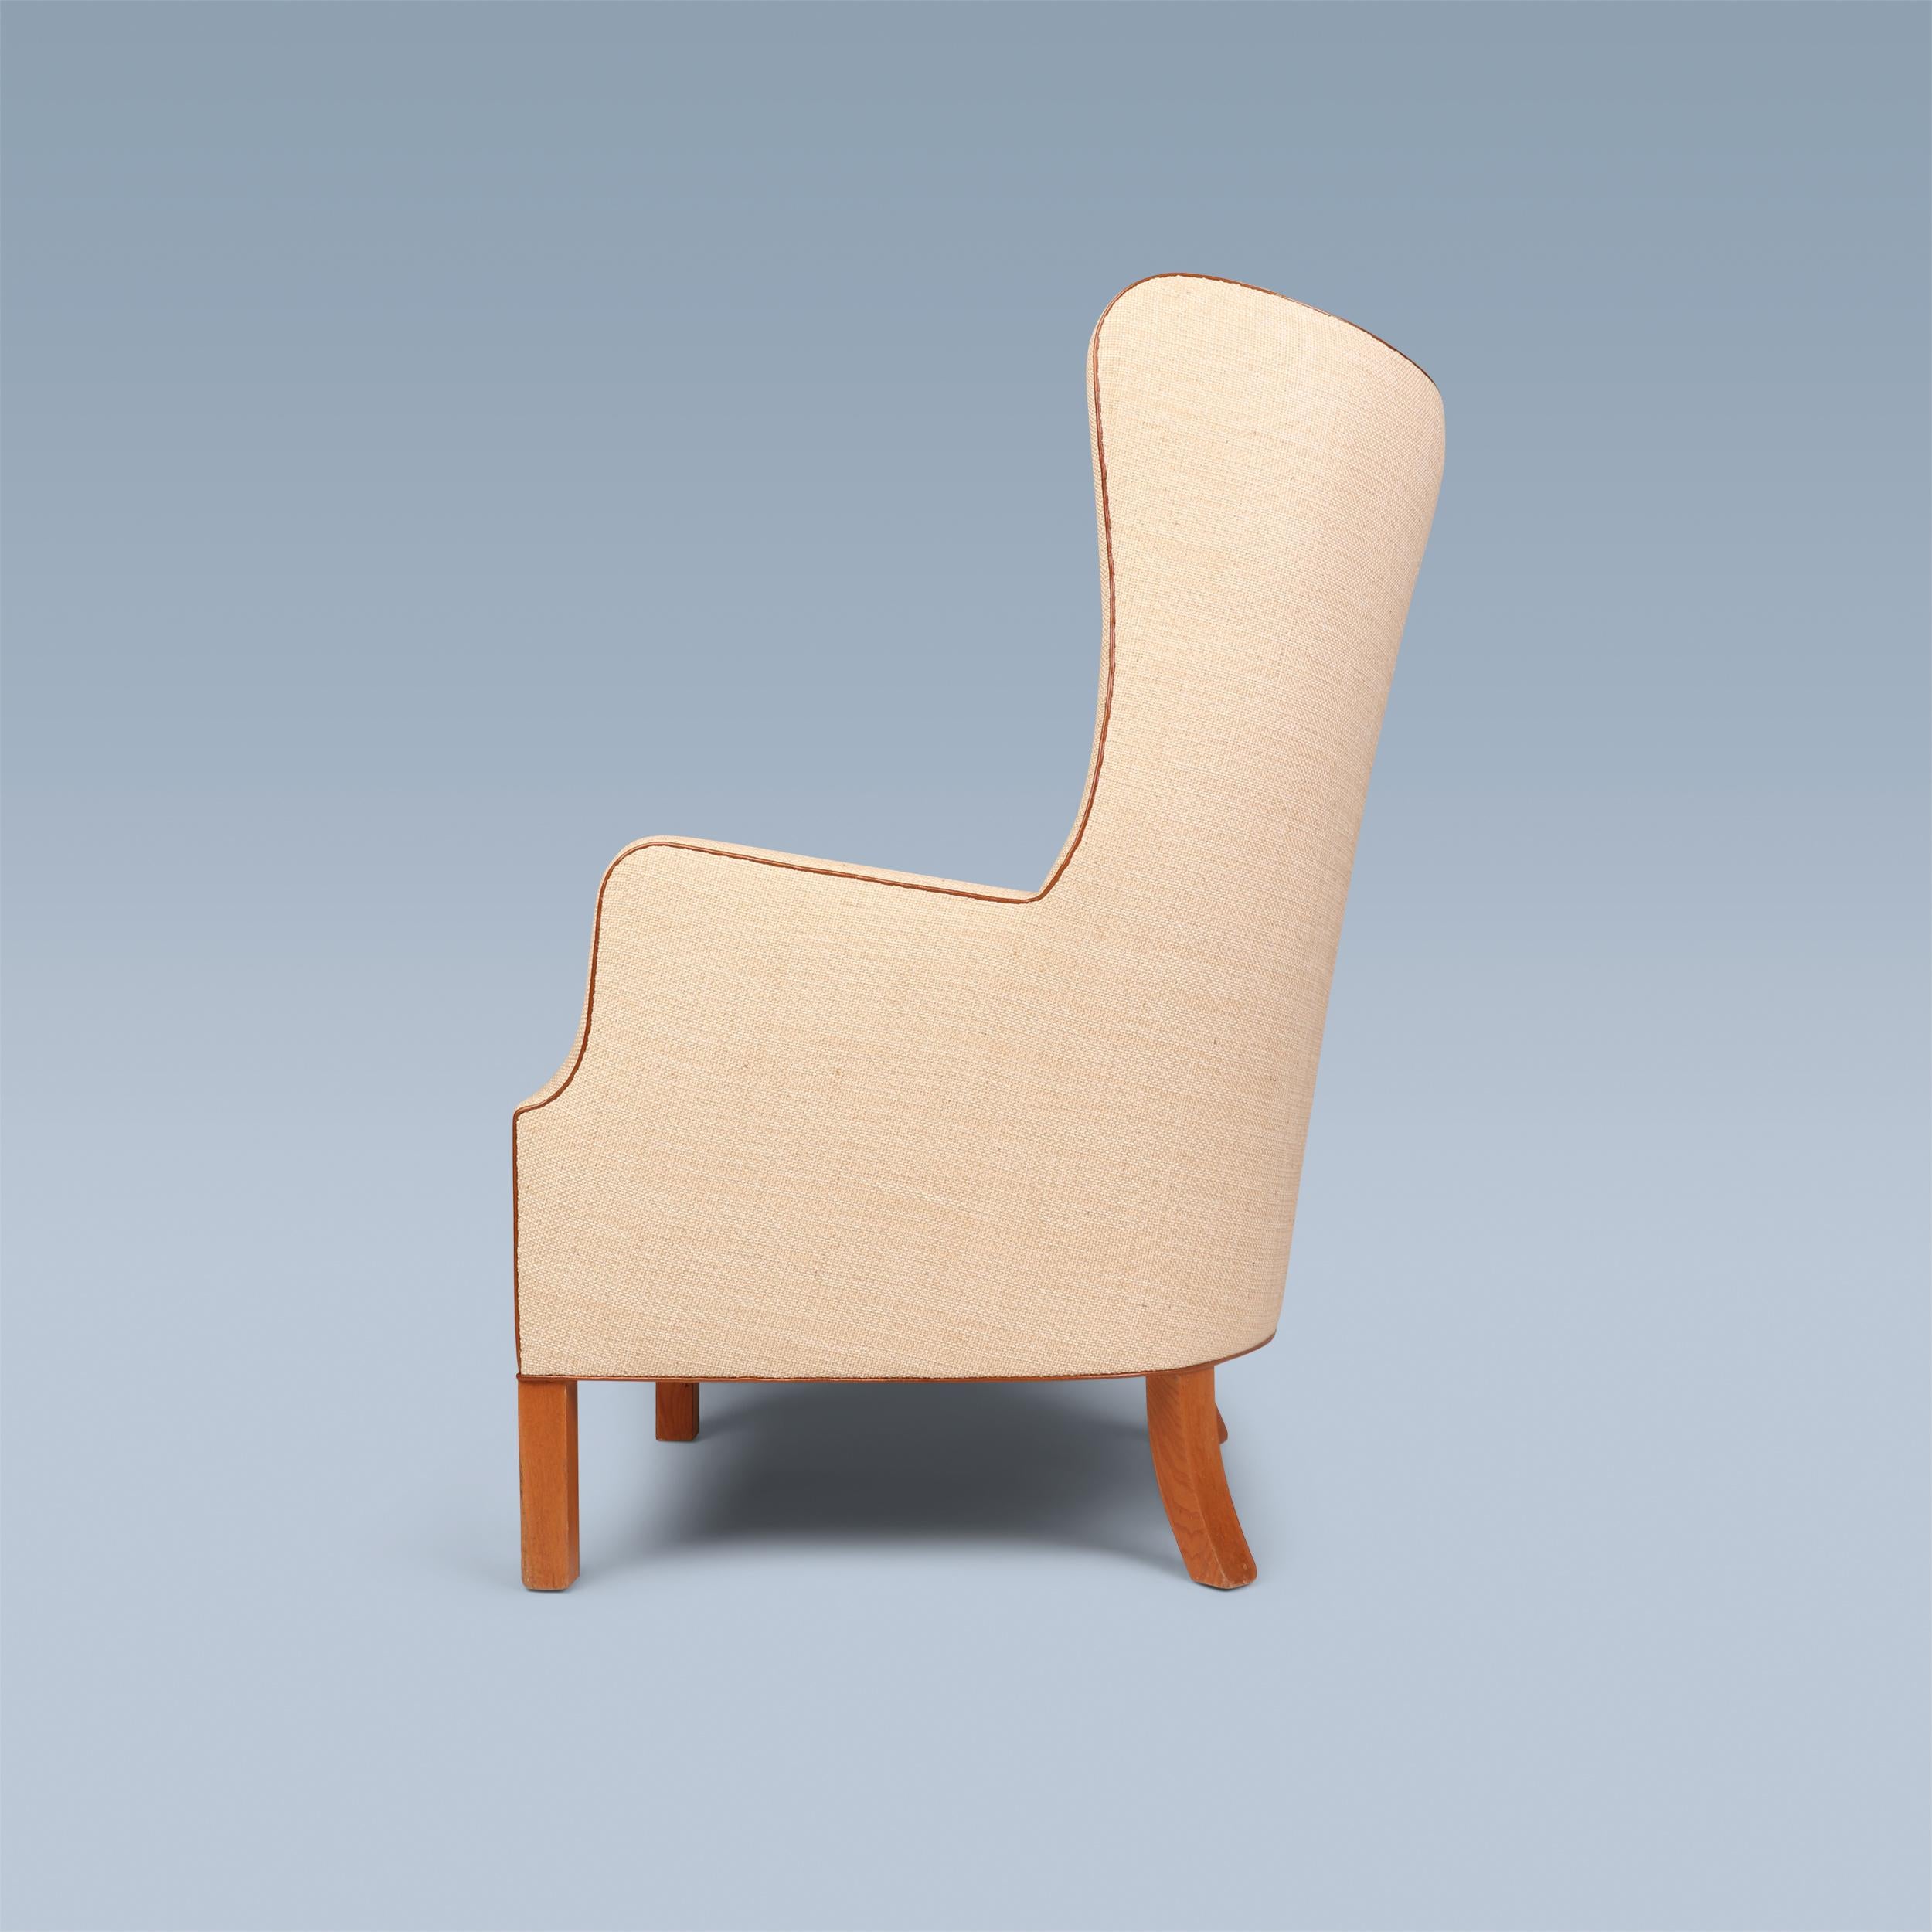 This very rare and early wingback was designed in 1946 by Grete Jalk (1920-2006) and Ejner Larsen (1917-1987). The legs are of elm. Seat, back and sides are upholstered with light fabric including Niger leather buttons and piping.
The young Grete